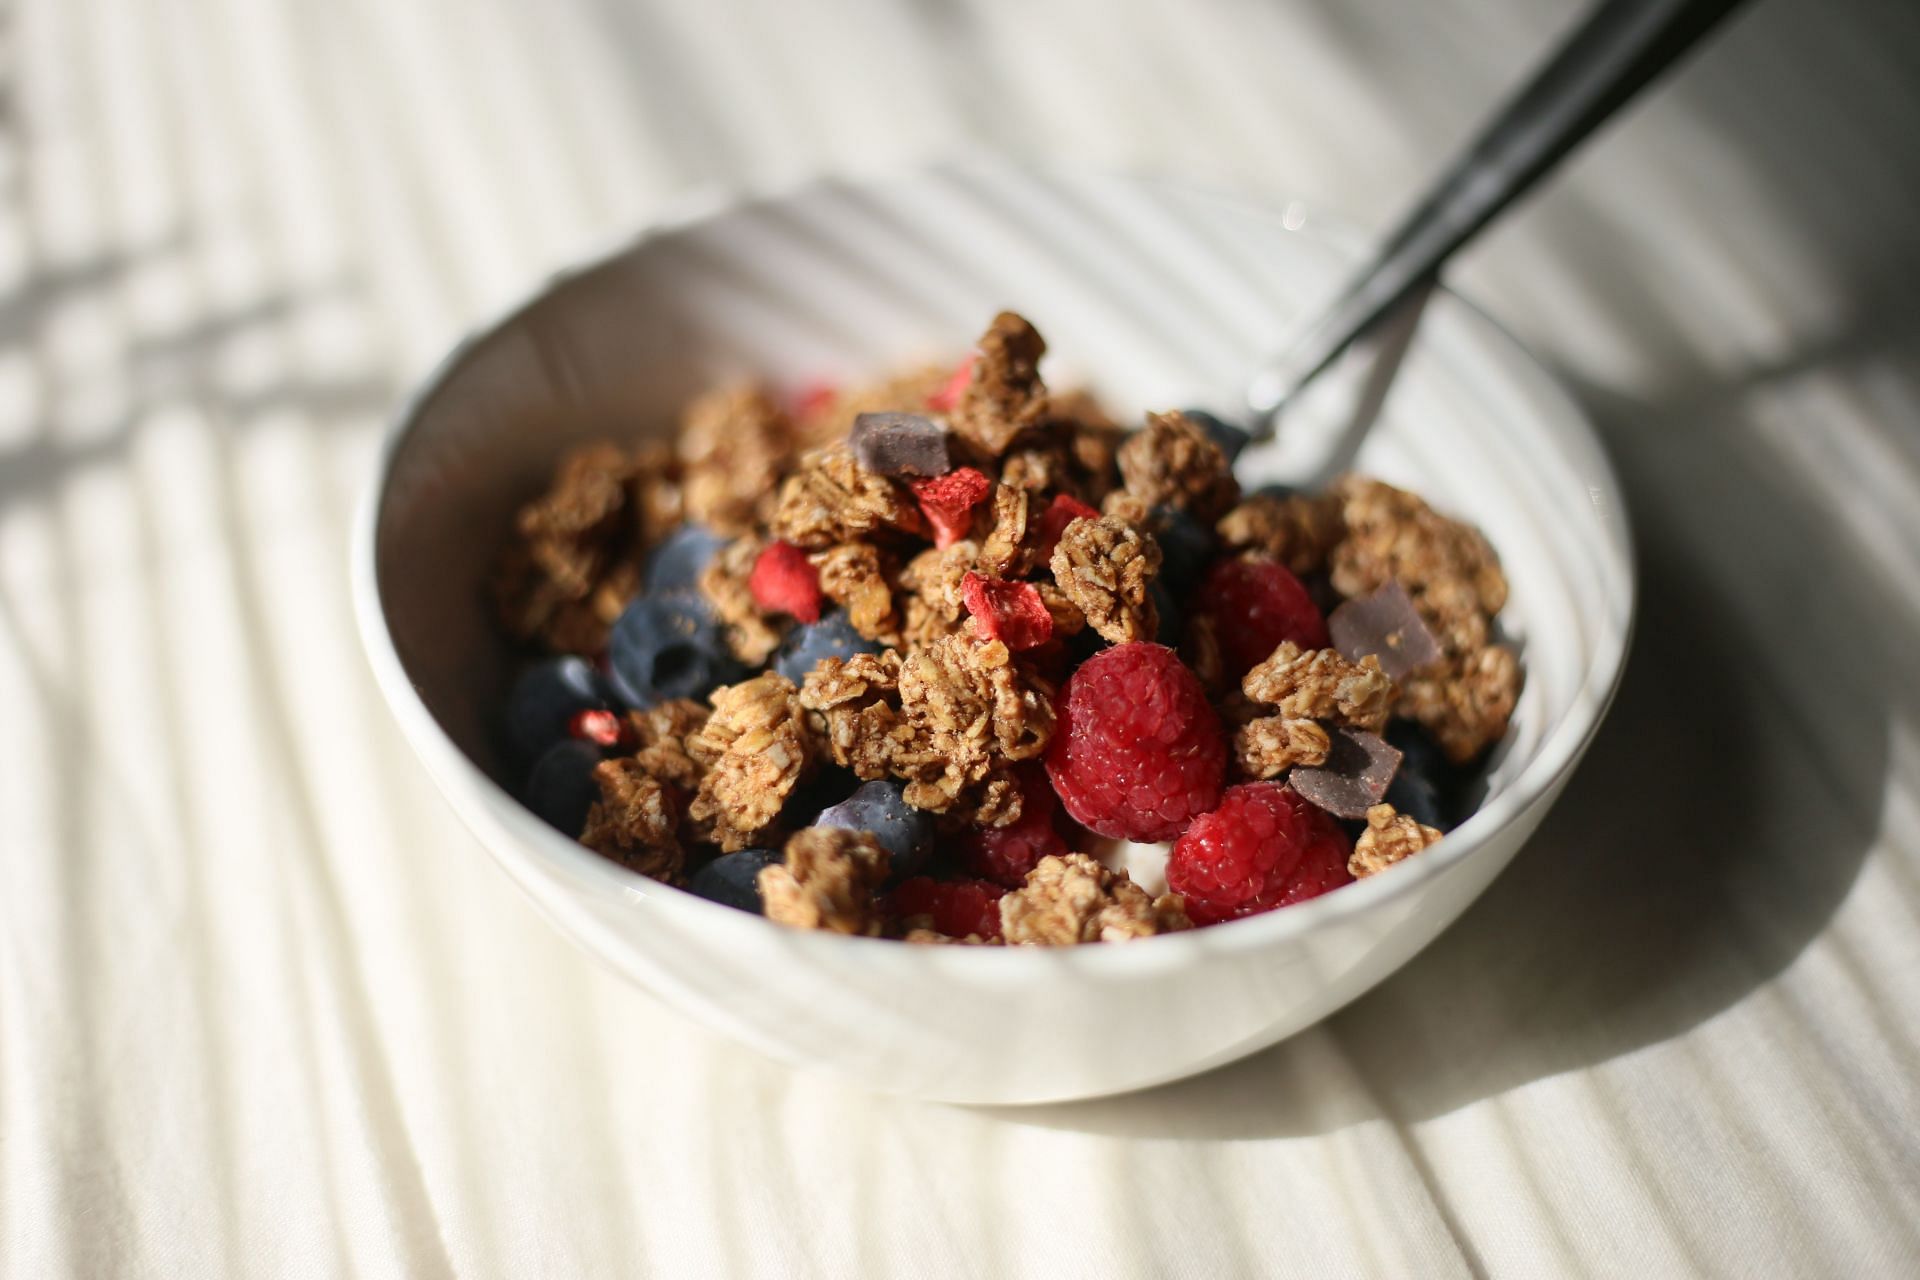 Is oatmeal good for constipation? - can be consumed for breakfast. (Image via Unsplash / Fallon Michael)